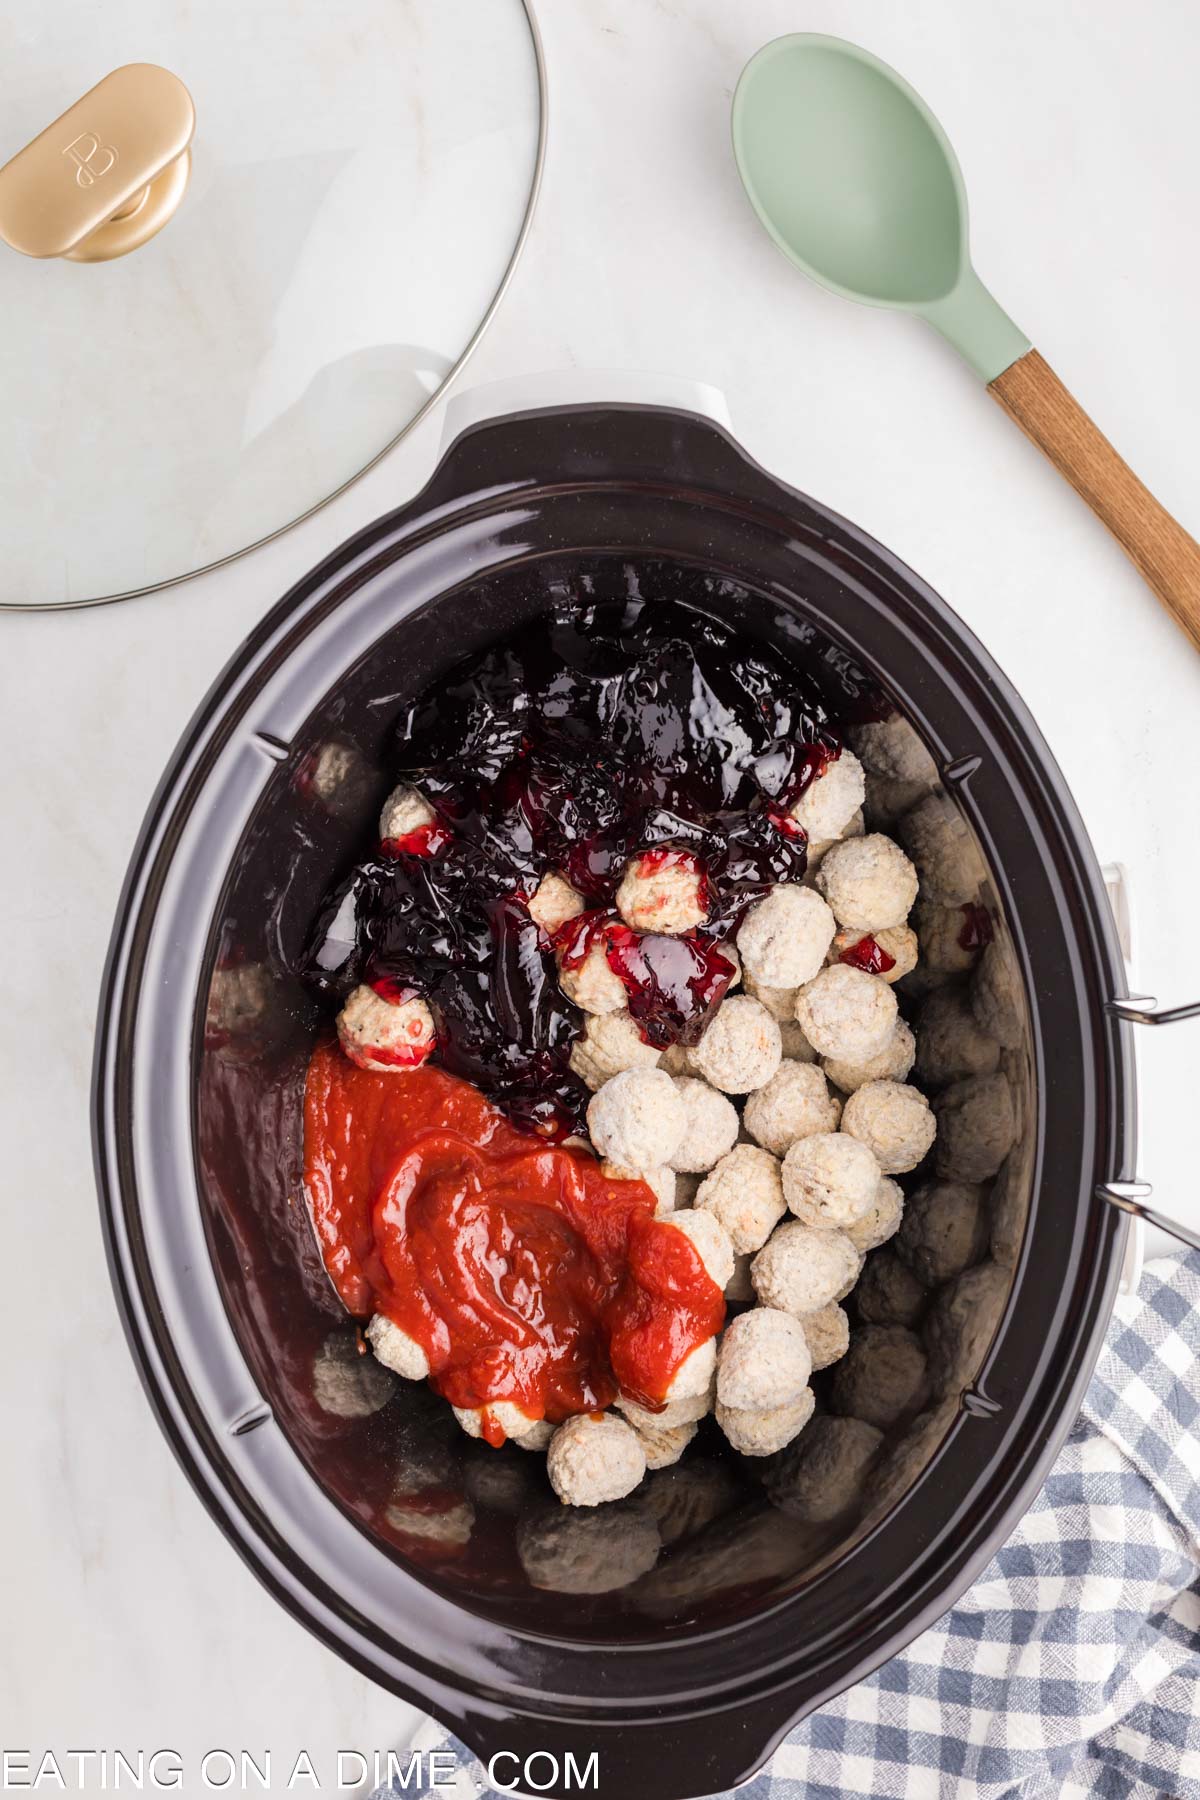 Adding the chili sauce and grape jelly in the crock pot with the meatballs